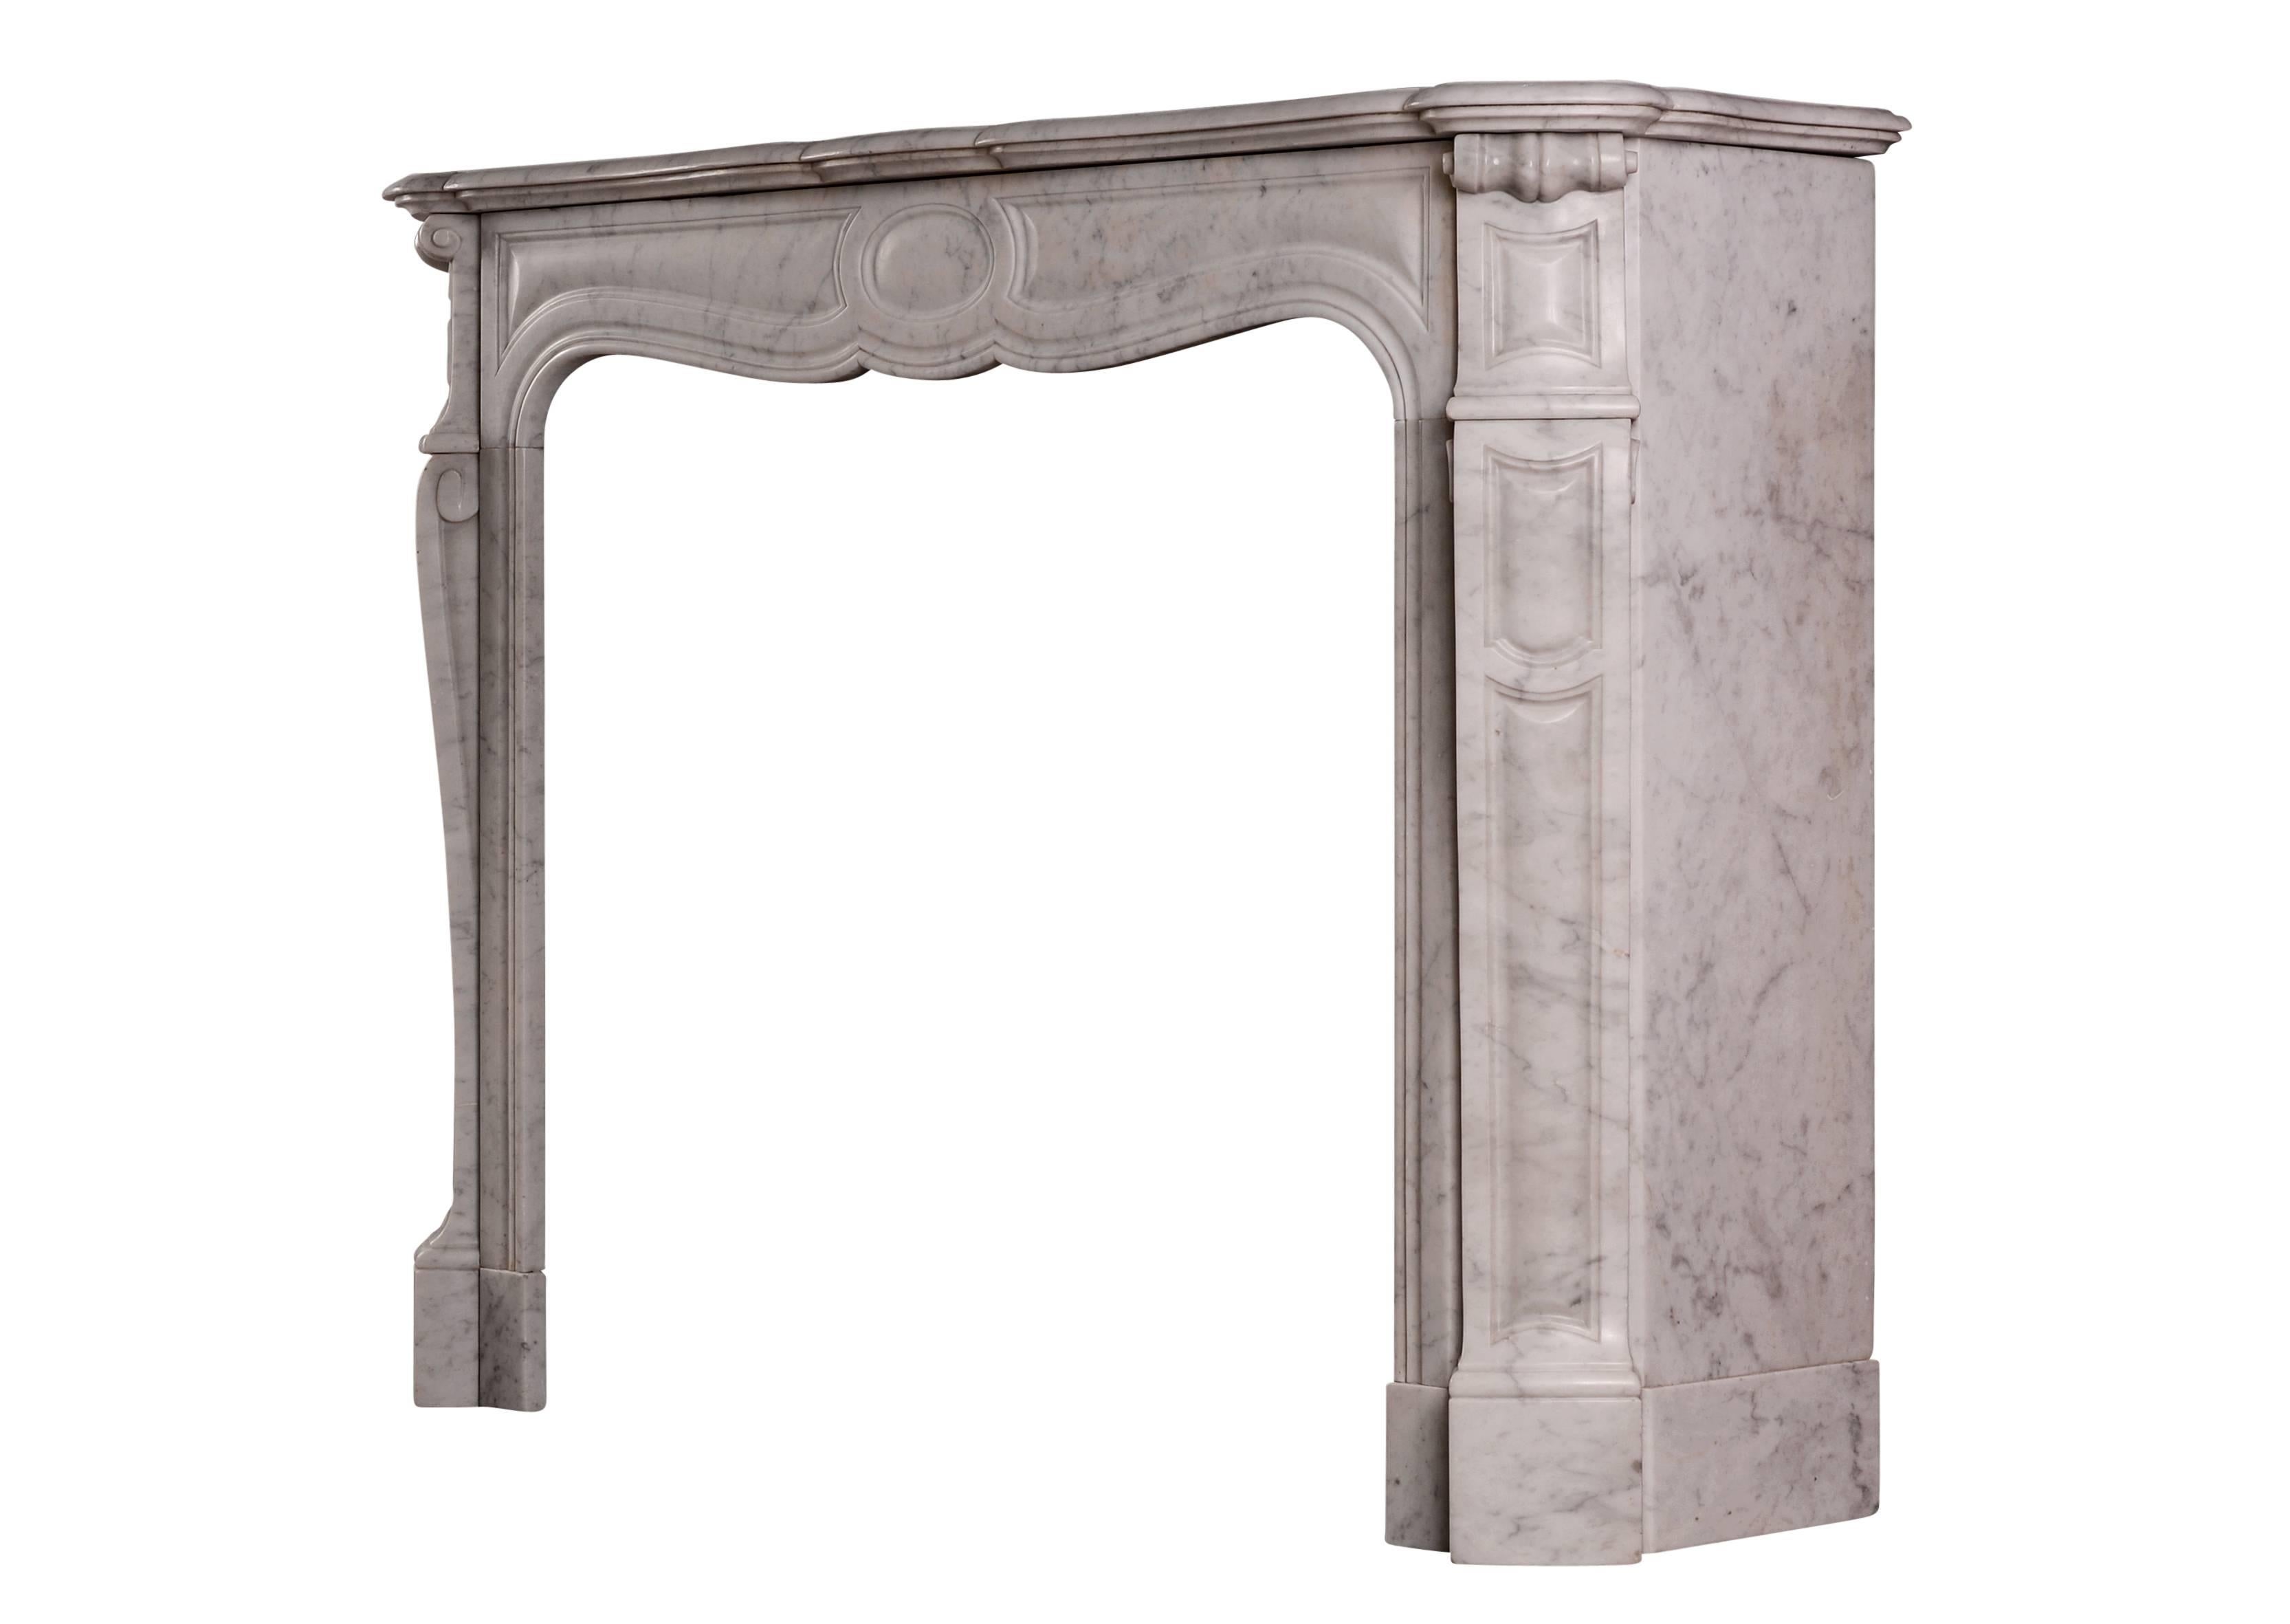 A 19th century French Louis XV style Pompadour fireplace in Carrara marble. The shaped, panelled jambs with scrolls to top, the frieze with panels and oval to centre. Shaped, moulded shelf. (Some staining to frieze.)

Measures: Shelf width 1229 mm